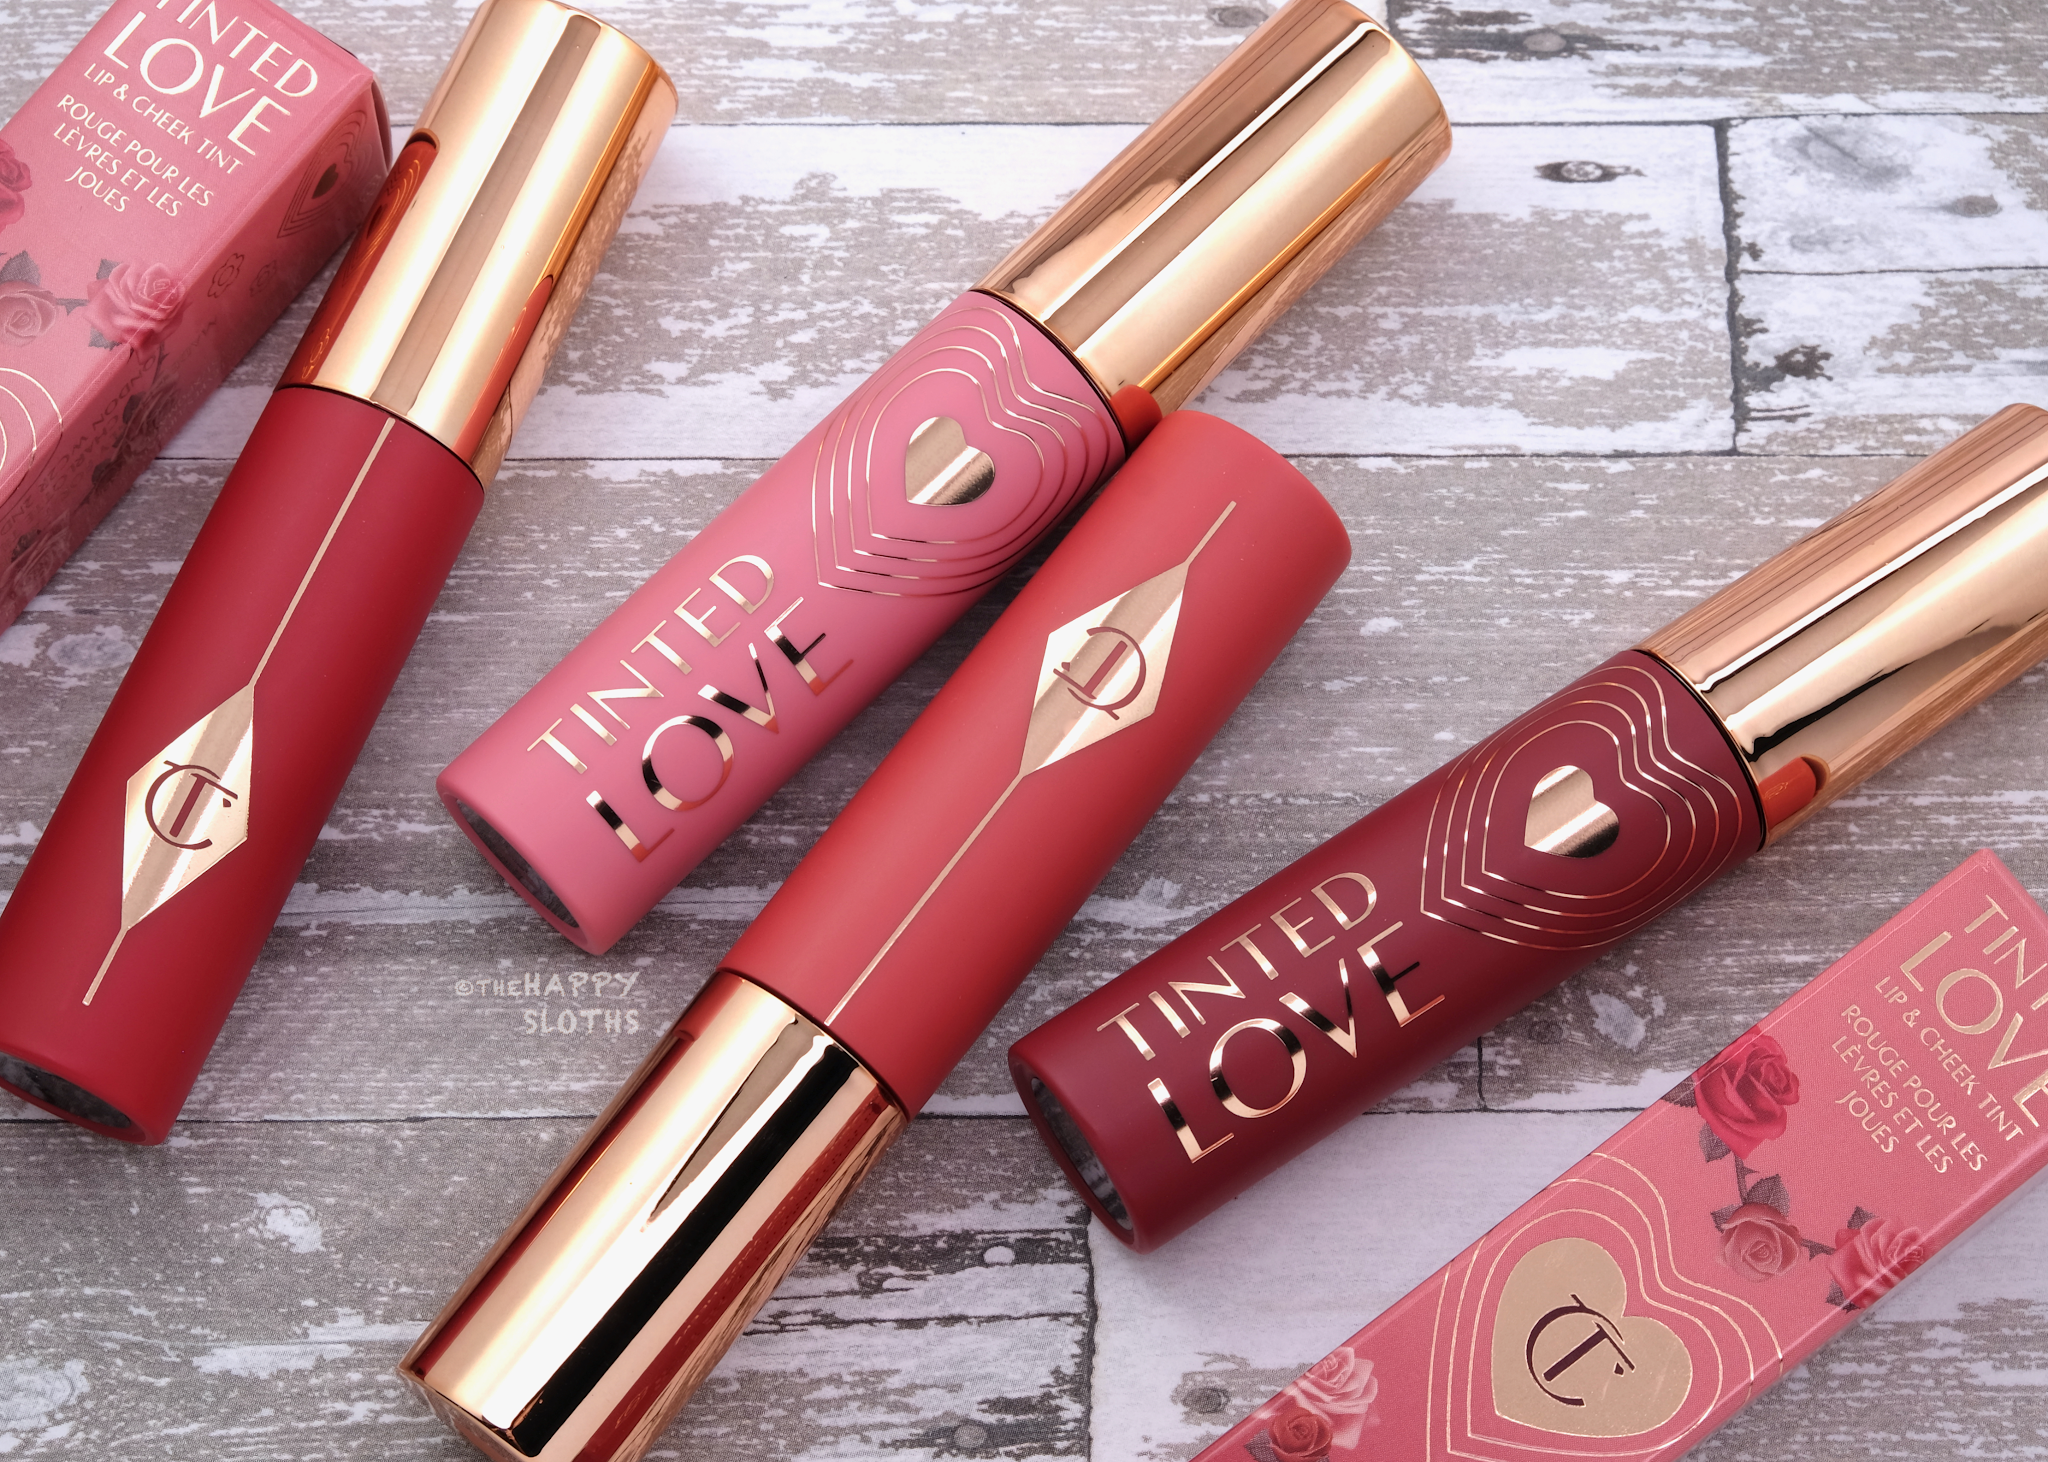 Charlotte Tilbury | Tinted Love Lip & Cheek Tint: Review and Swatches